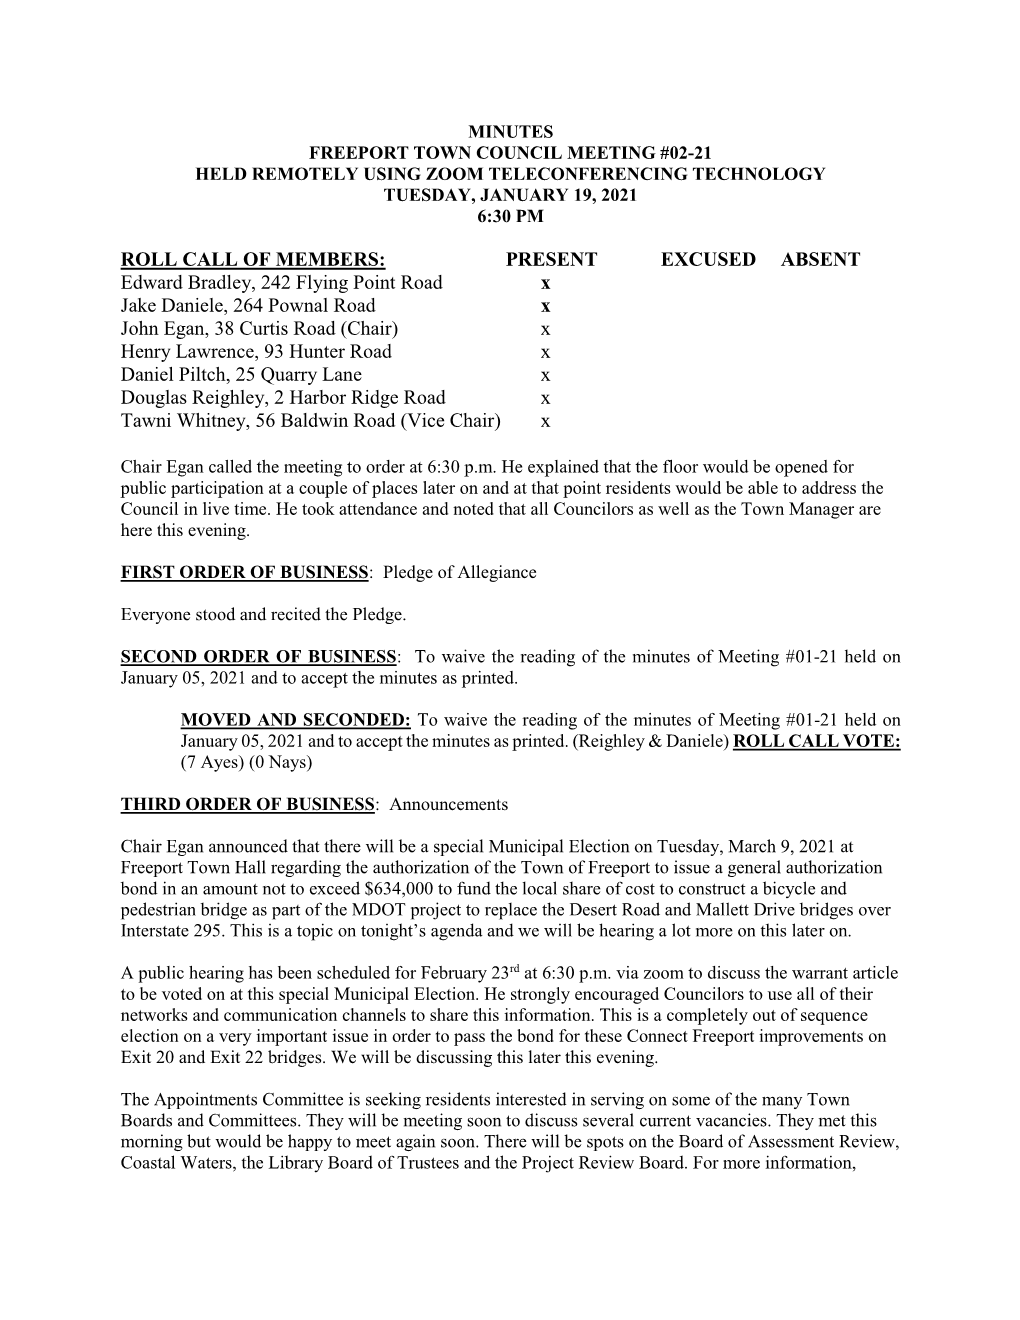 Town Council Minutes 01/19/2021